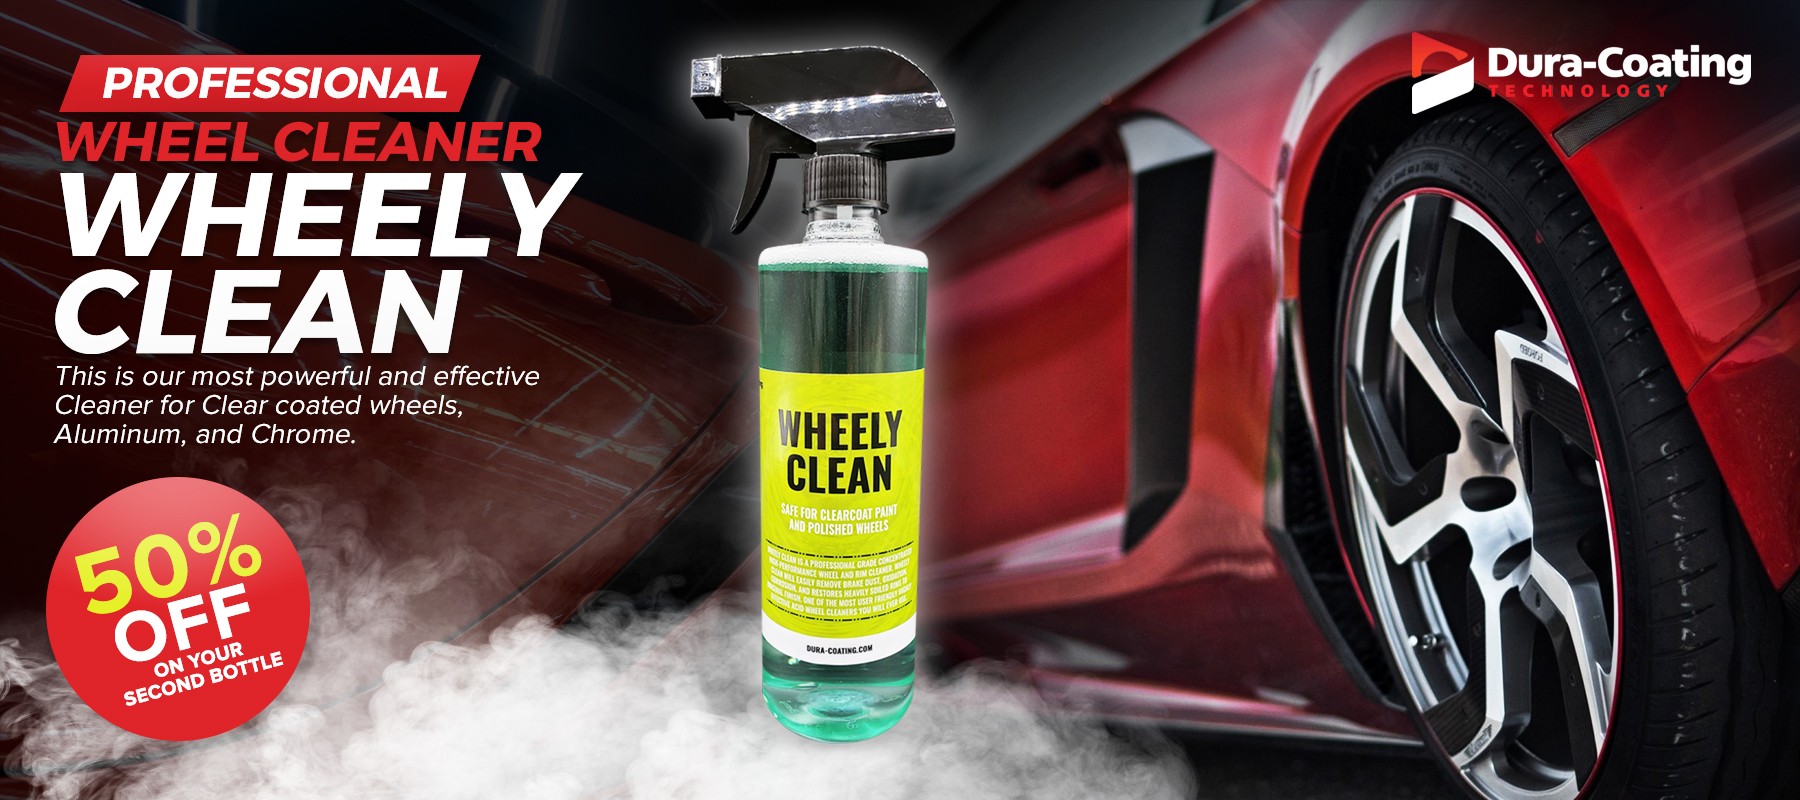 Dura-Coating Technology Dura-Coating Wheely Clean - Professional